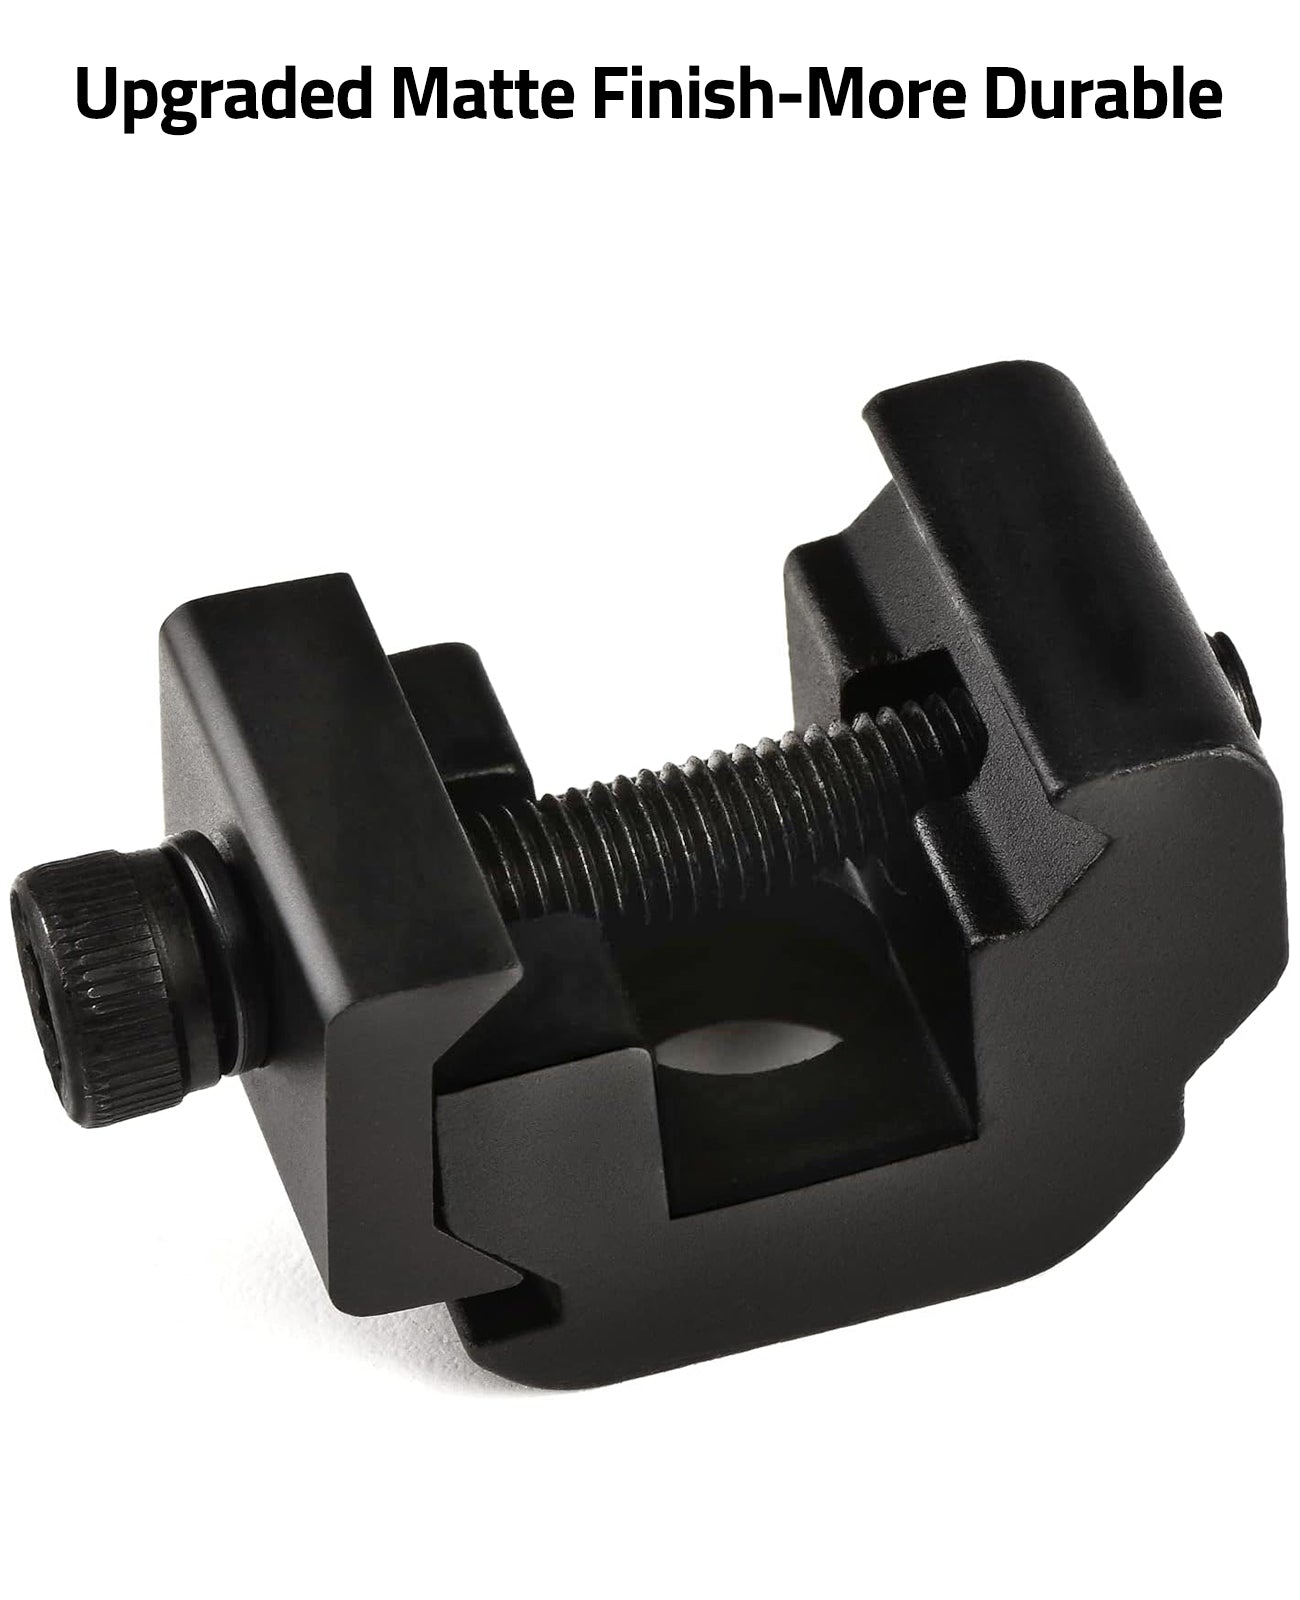 High Quality Sling Swivel with Upgraded Matte Finish